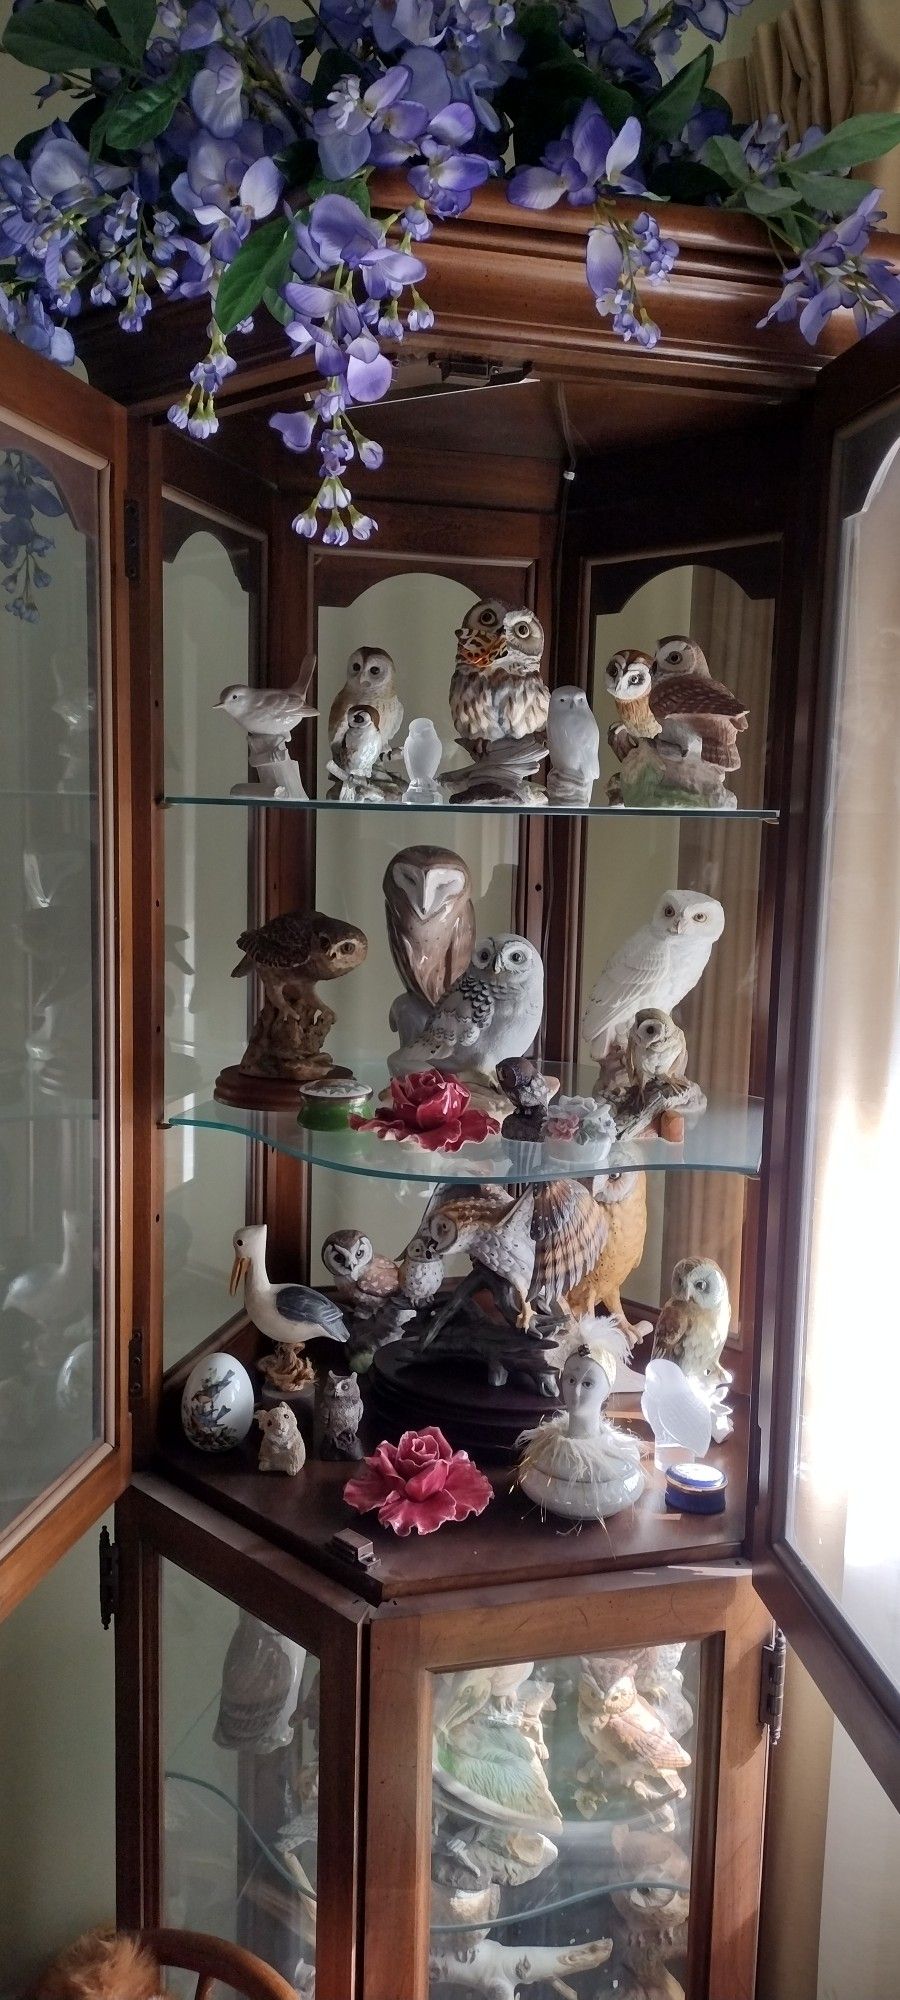 Owl Statues And Plates